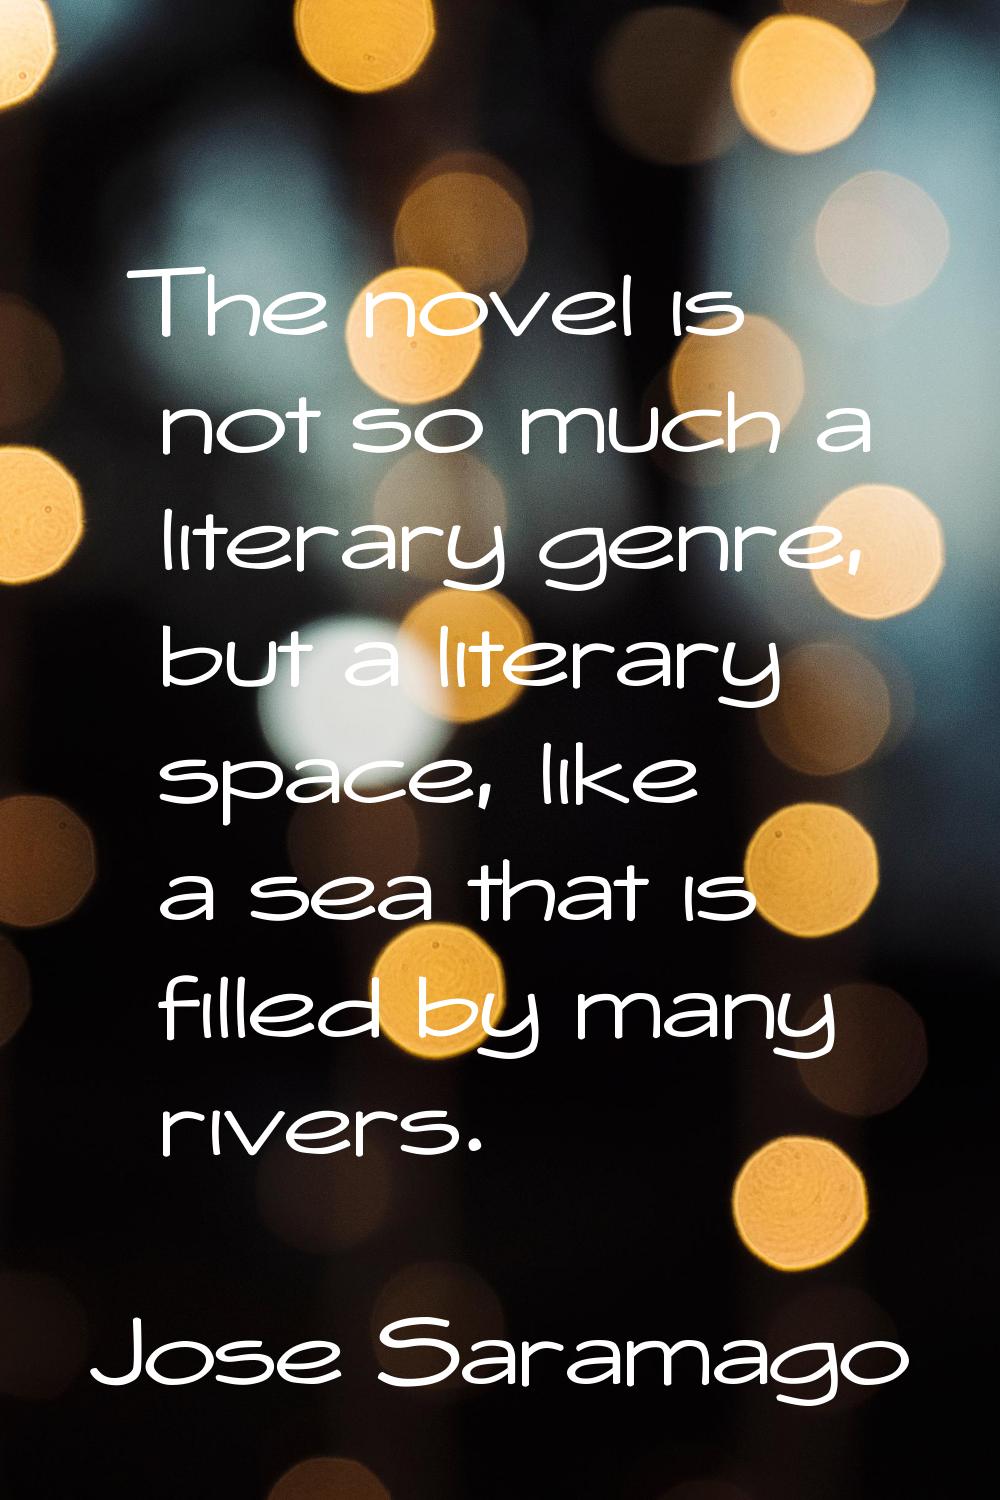 The novel is not so much a literary genre, but a literary space, like a sea that is filled by many 